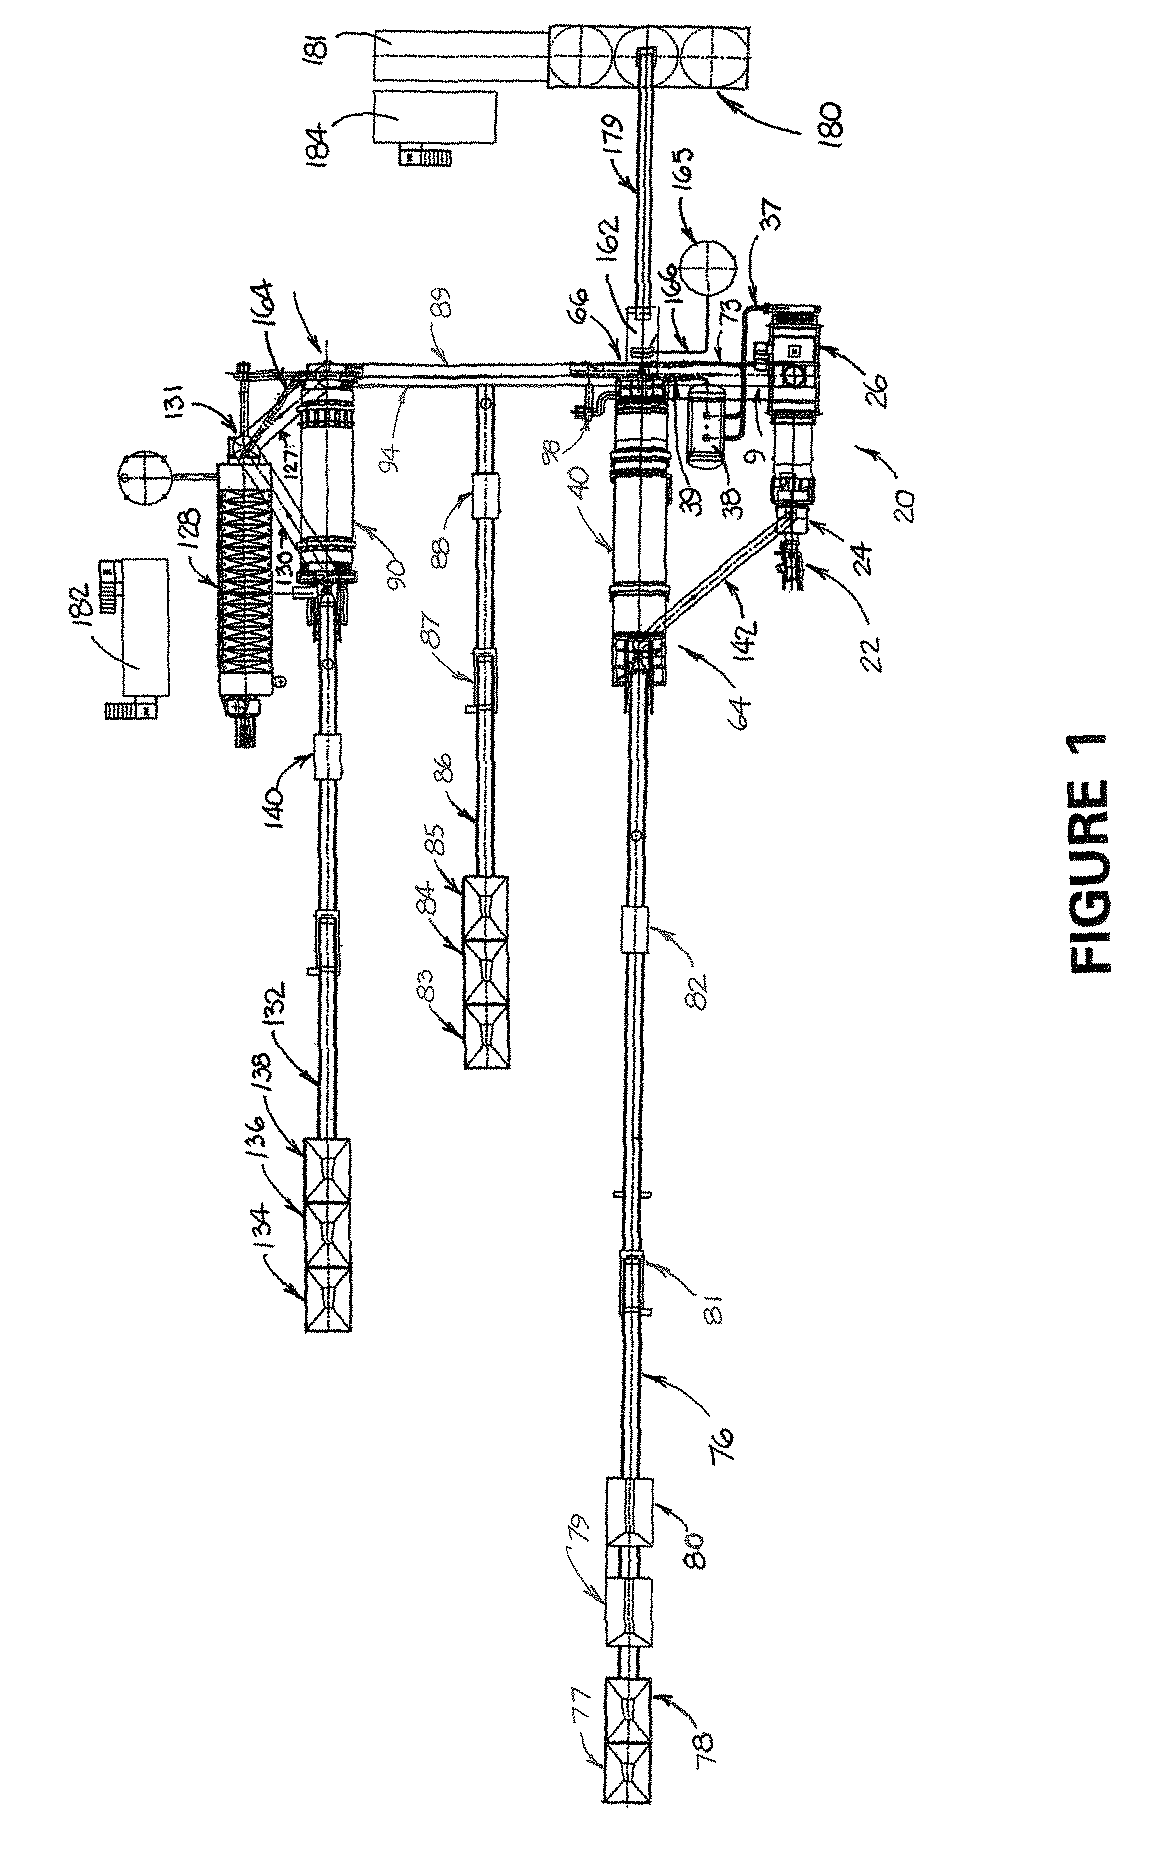 Method and apparatus for making asphalt concrete using aggregate material from a plurality of material streams